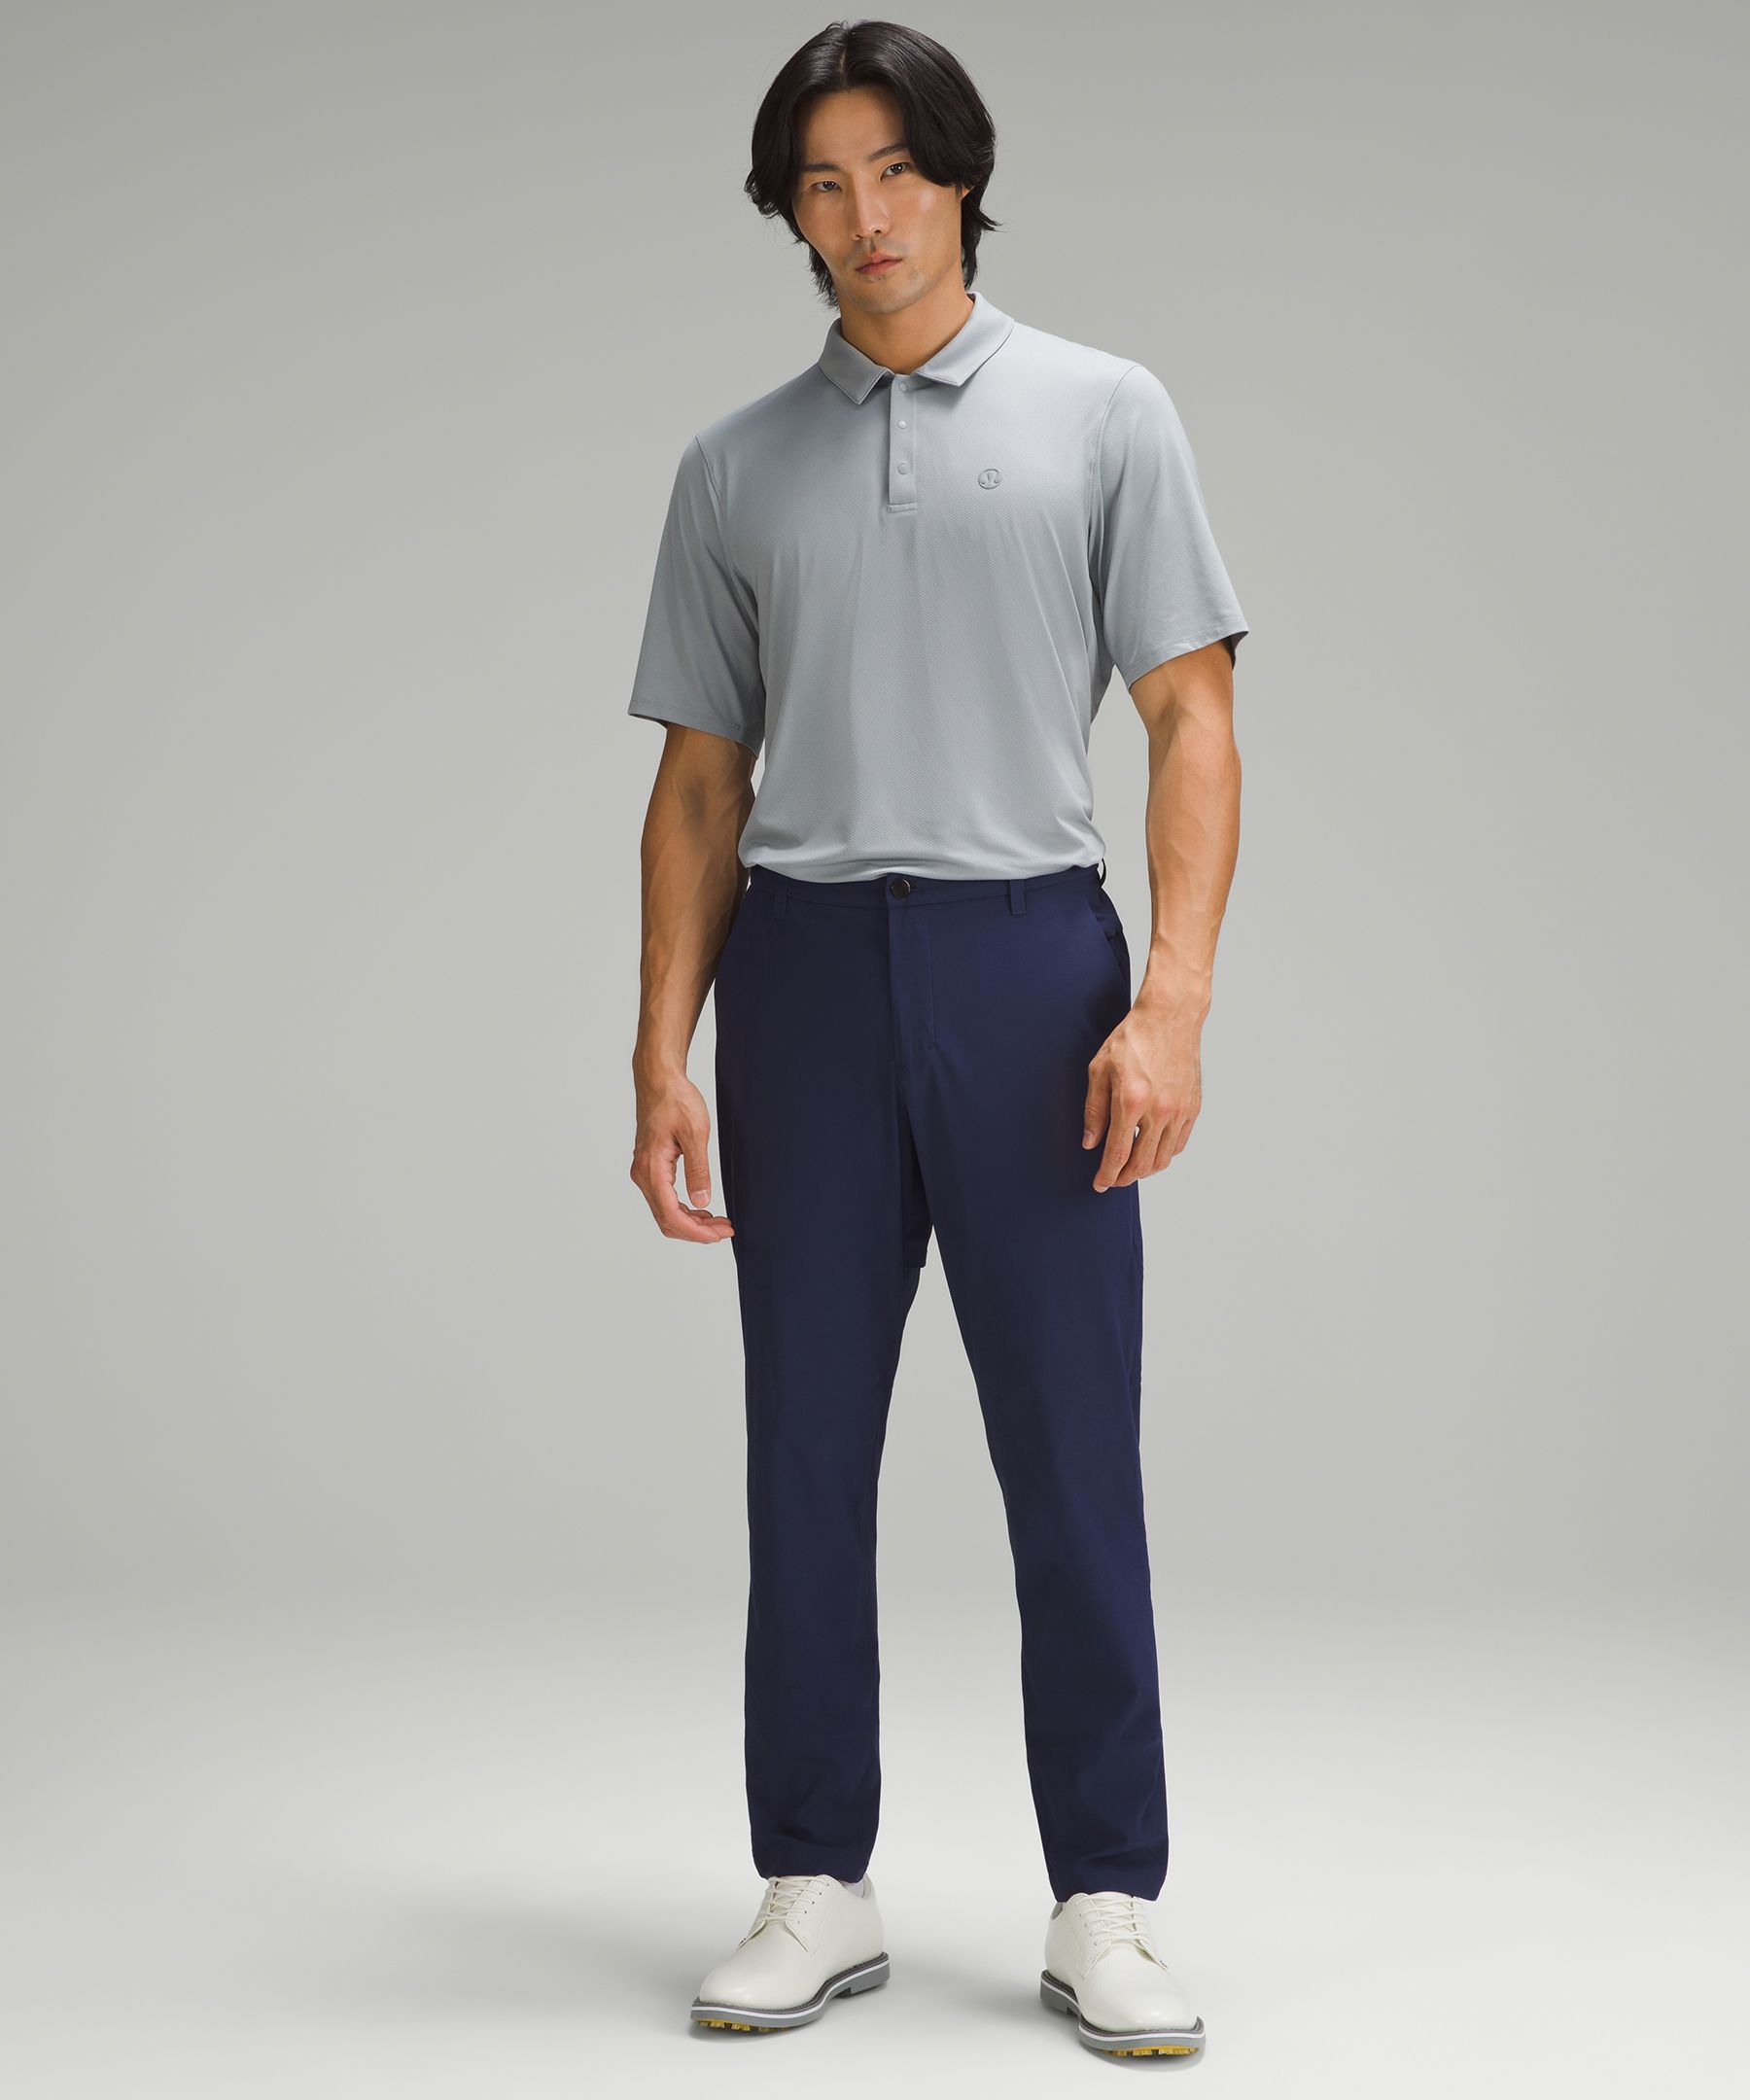 Stretch Nylon Classic-Tapered Golf Pant 32, Men's Trousers